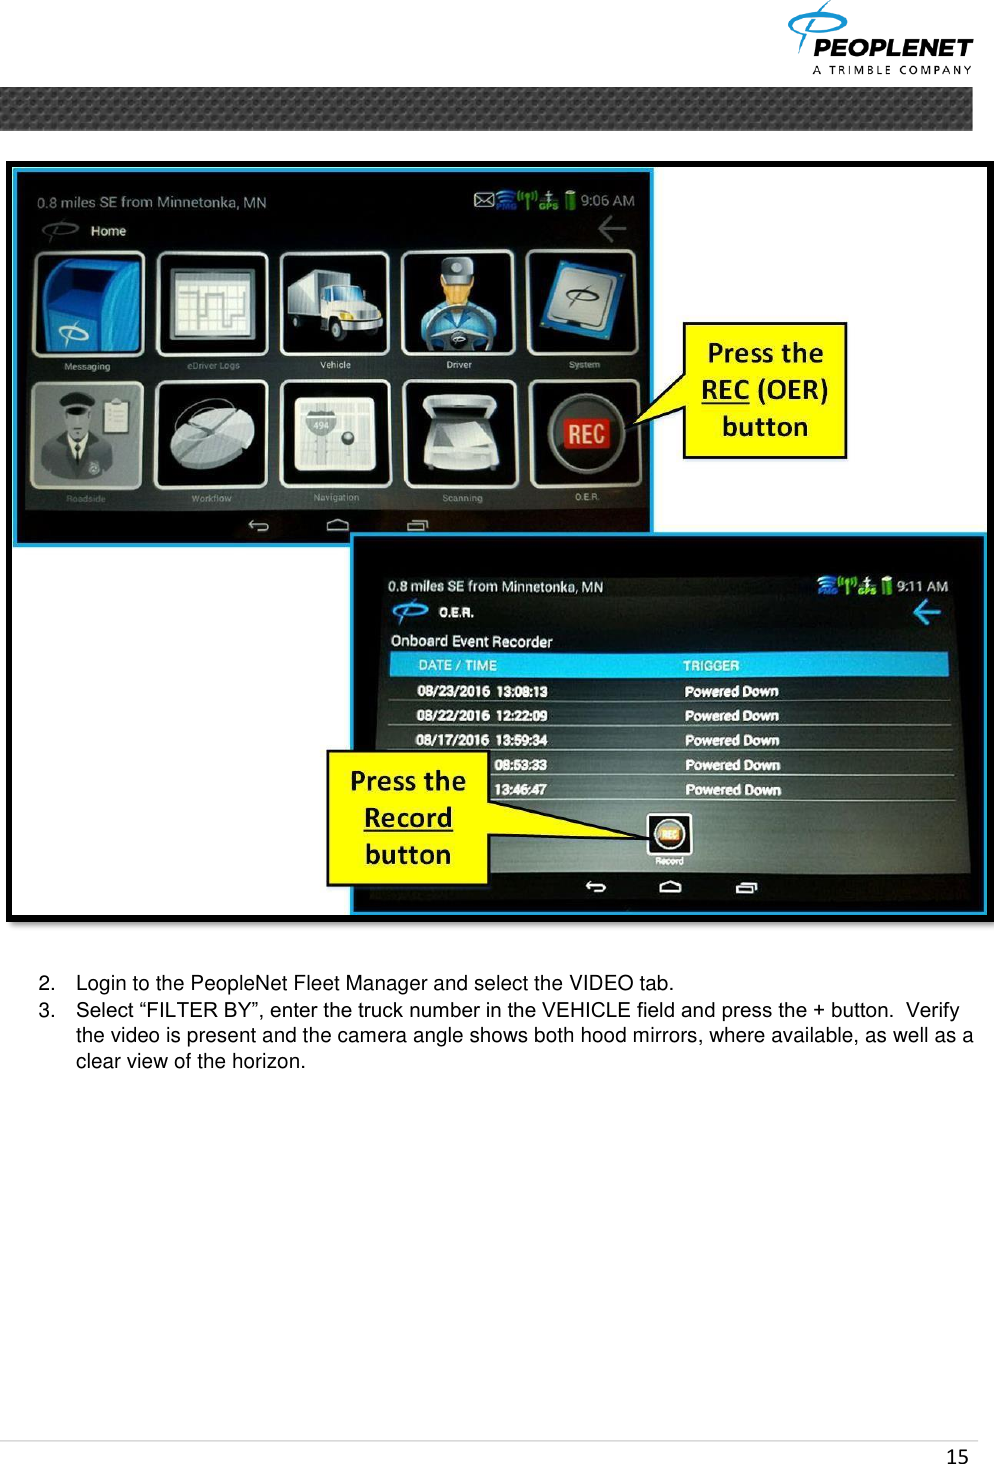  15       2.  Login to the PeopleNet Fleet Manager and select the VIDEO tab.  3. Select “FILTER BY”, enter the truck number in the VEHICLE field and press the + button.  Verify the video is present and the camera angle shows both hood mirrors, where available, as well as a clear view of the horizon.         